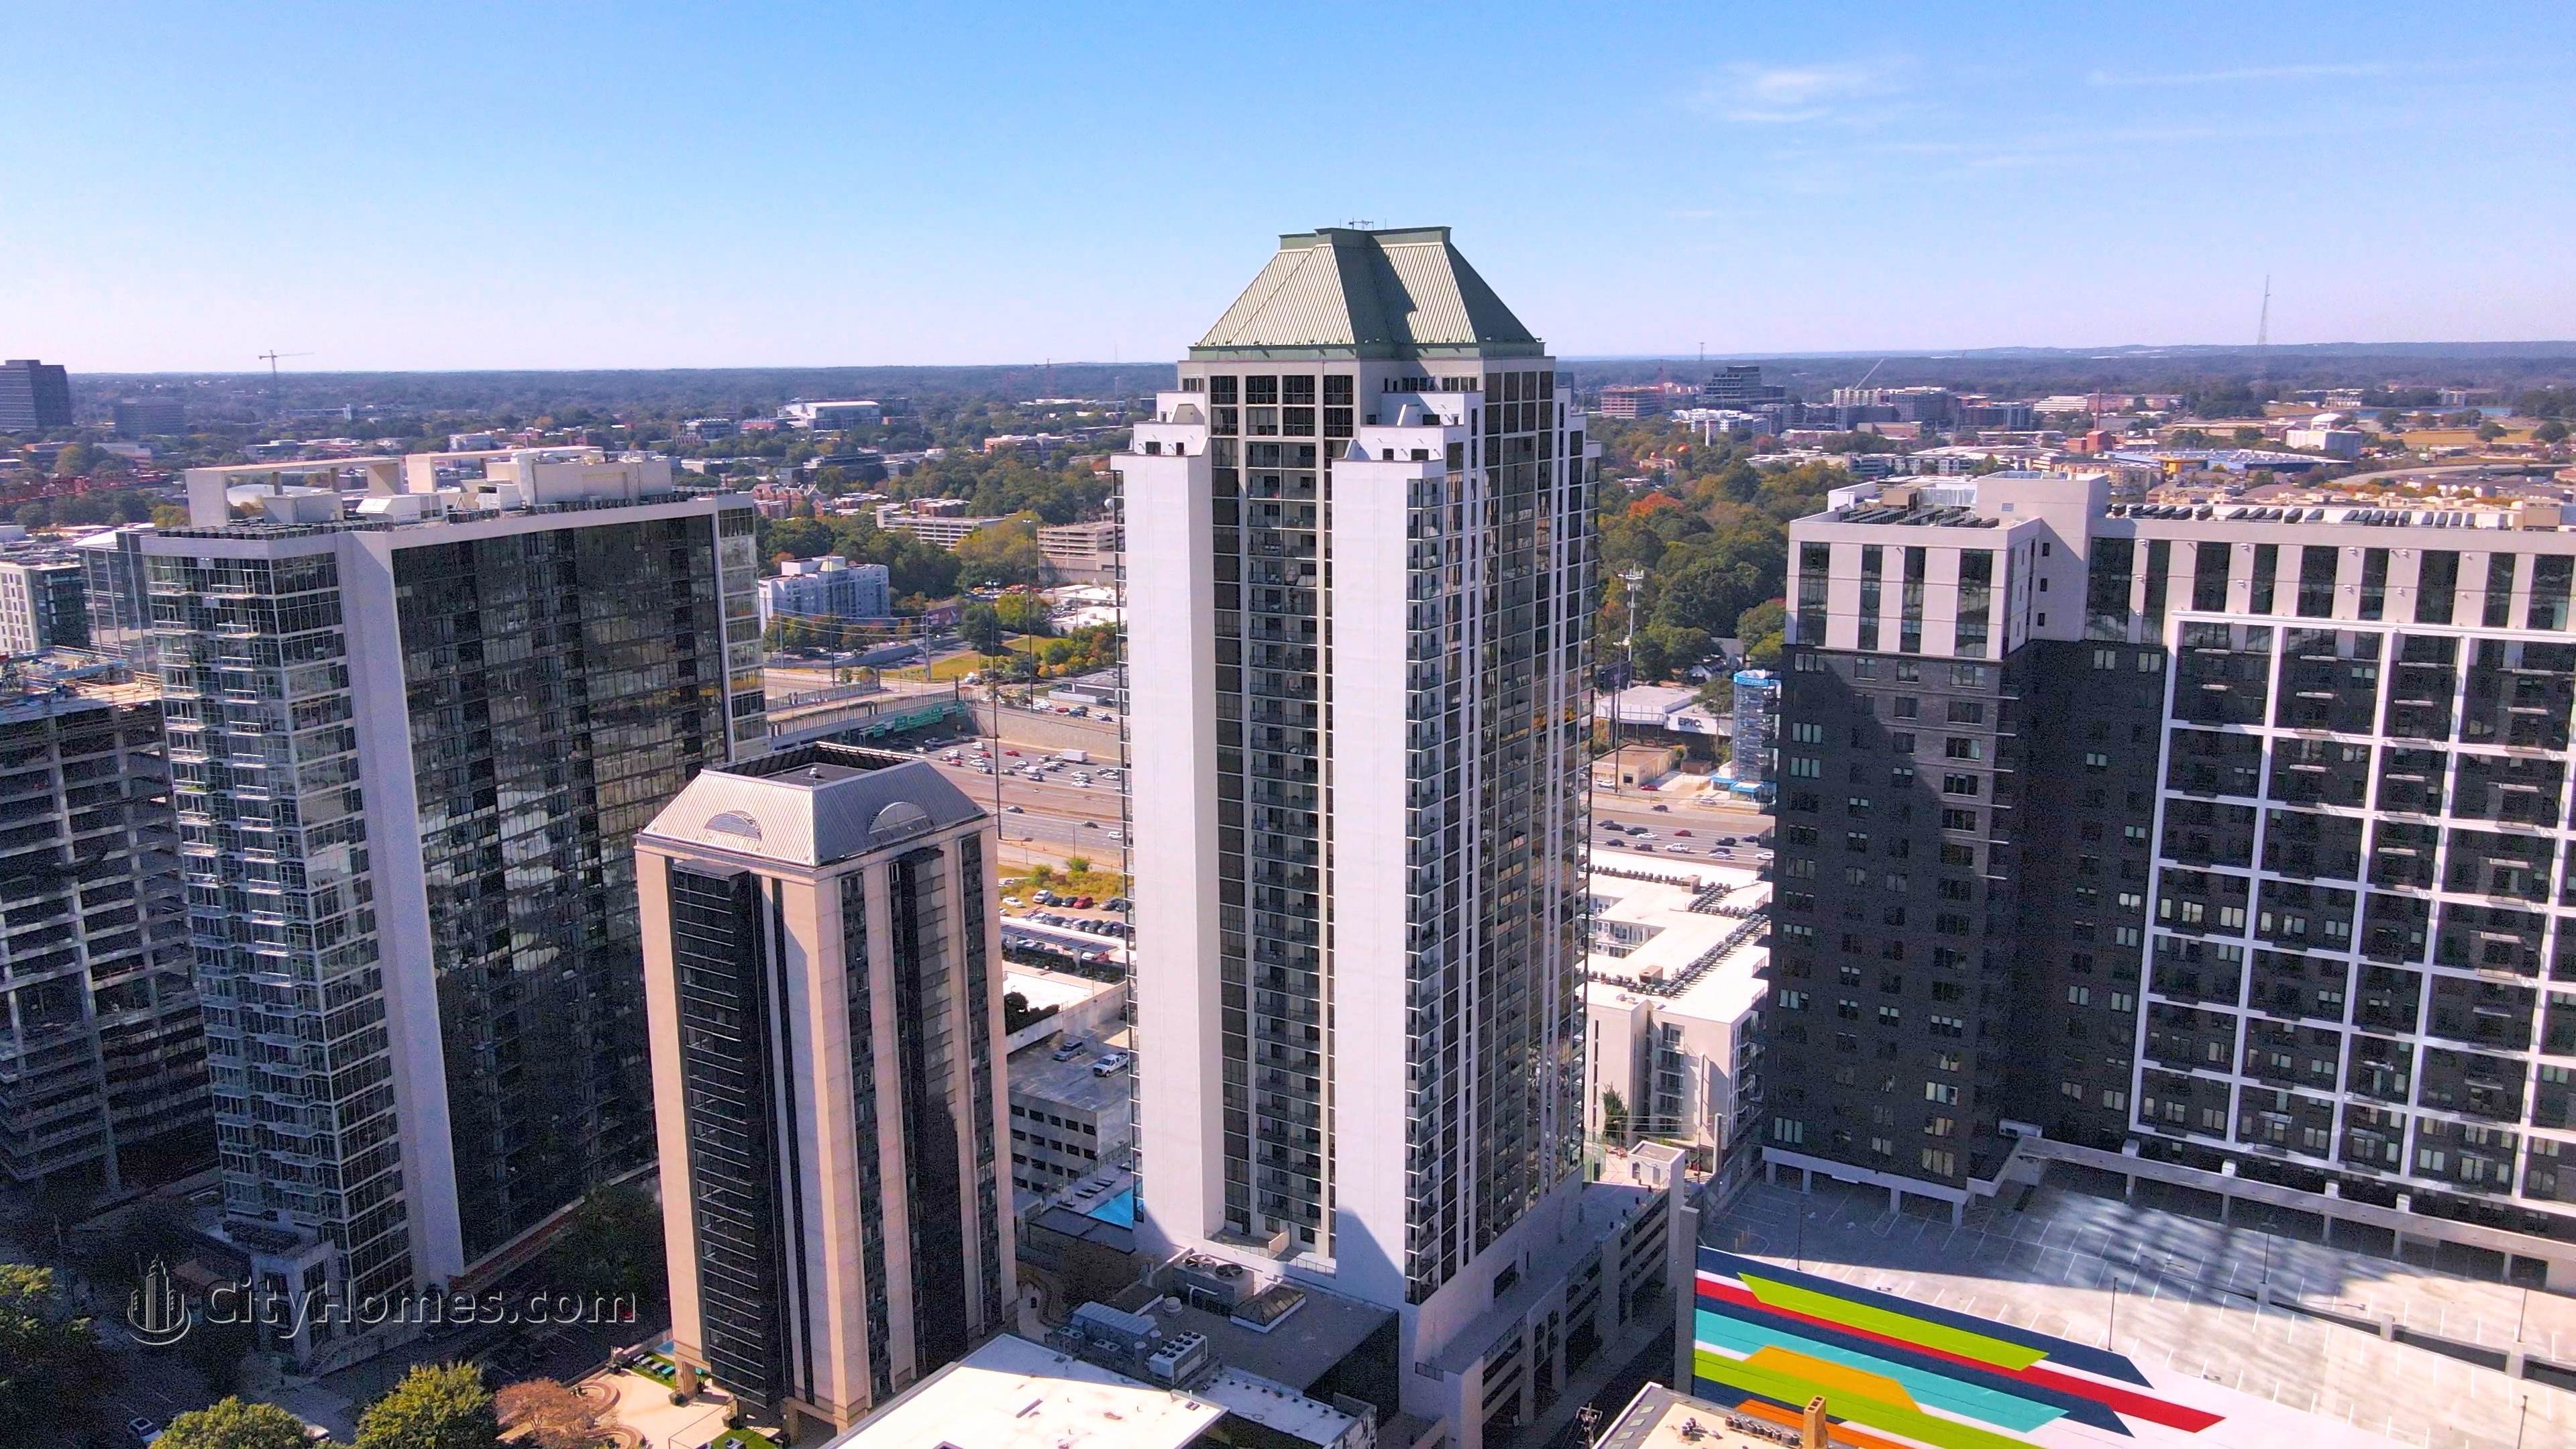 4. 1280 West Condos xây dựng tại 1280 West Peachtree St NW, Greater Midtown, Atlanta, GA 30309